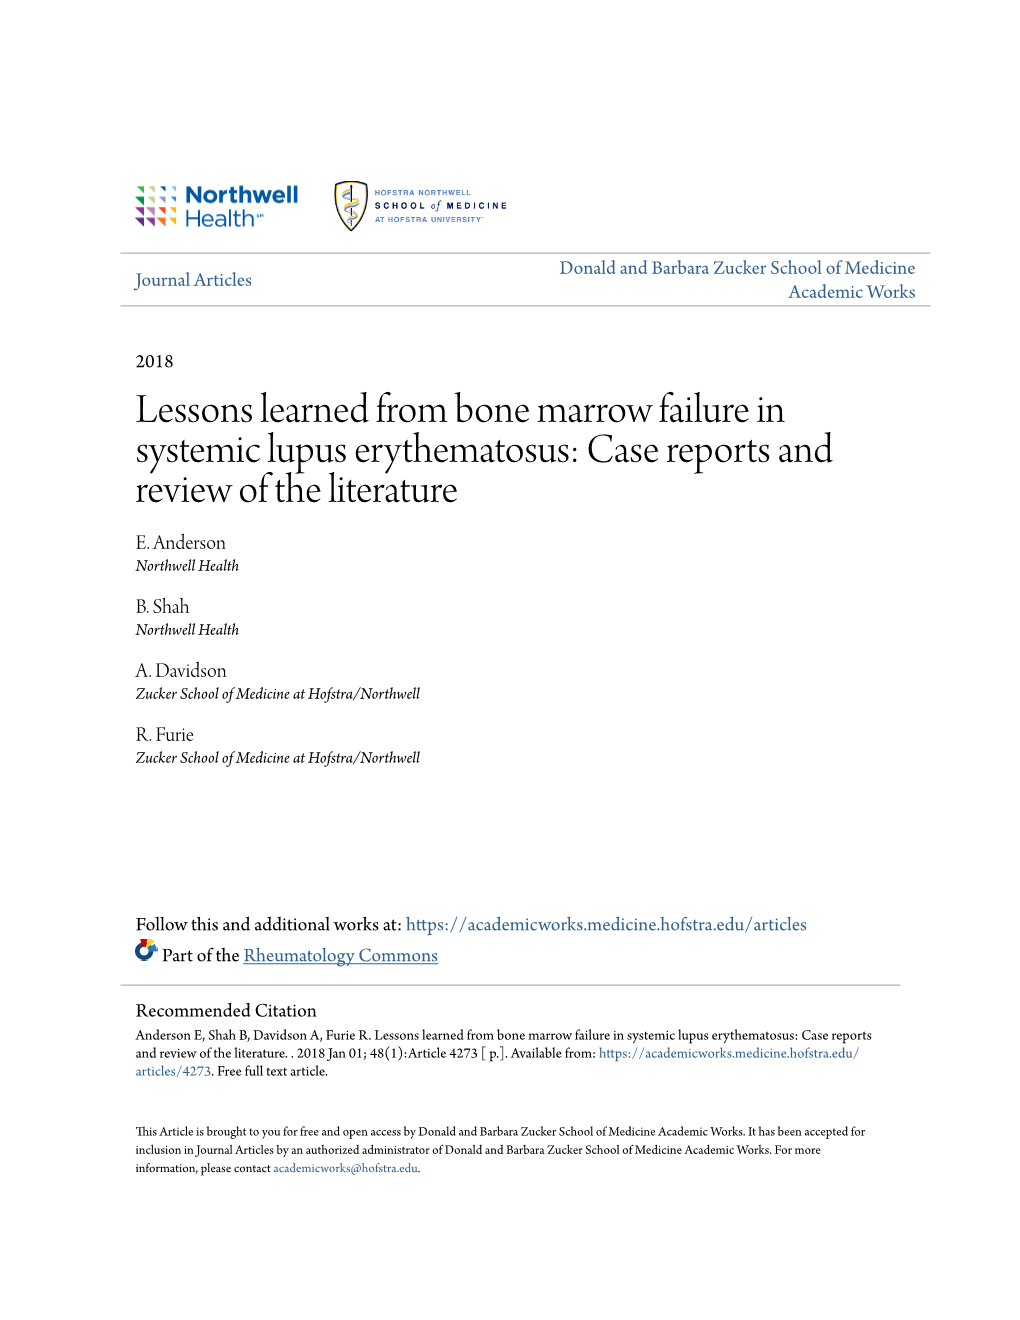 Lessons Learned from Bone Marrow Failure in Systemic Lupus Erythematosus: Case Reports and Review of the Literature E